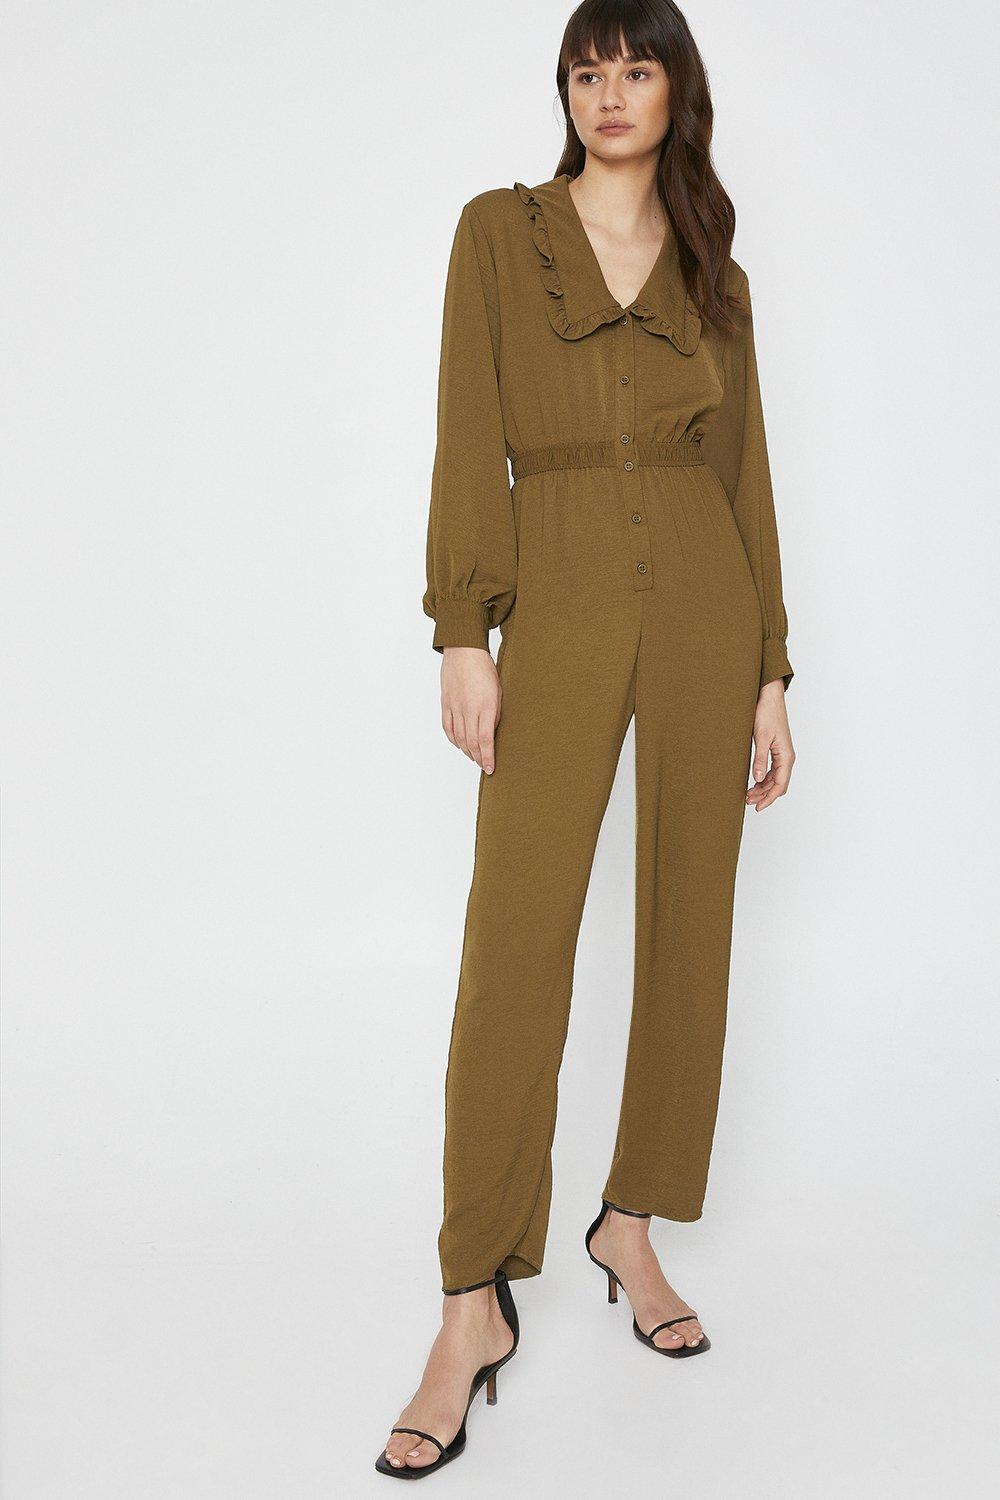 Jumpsuit With Frill Collar